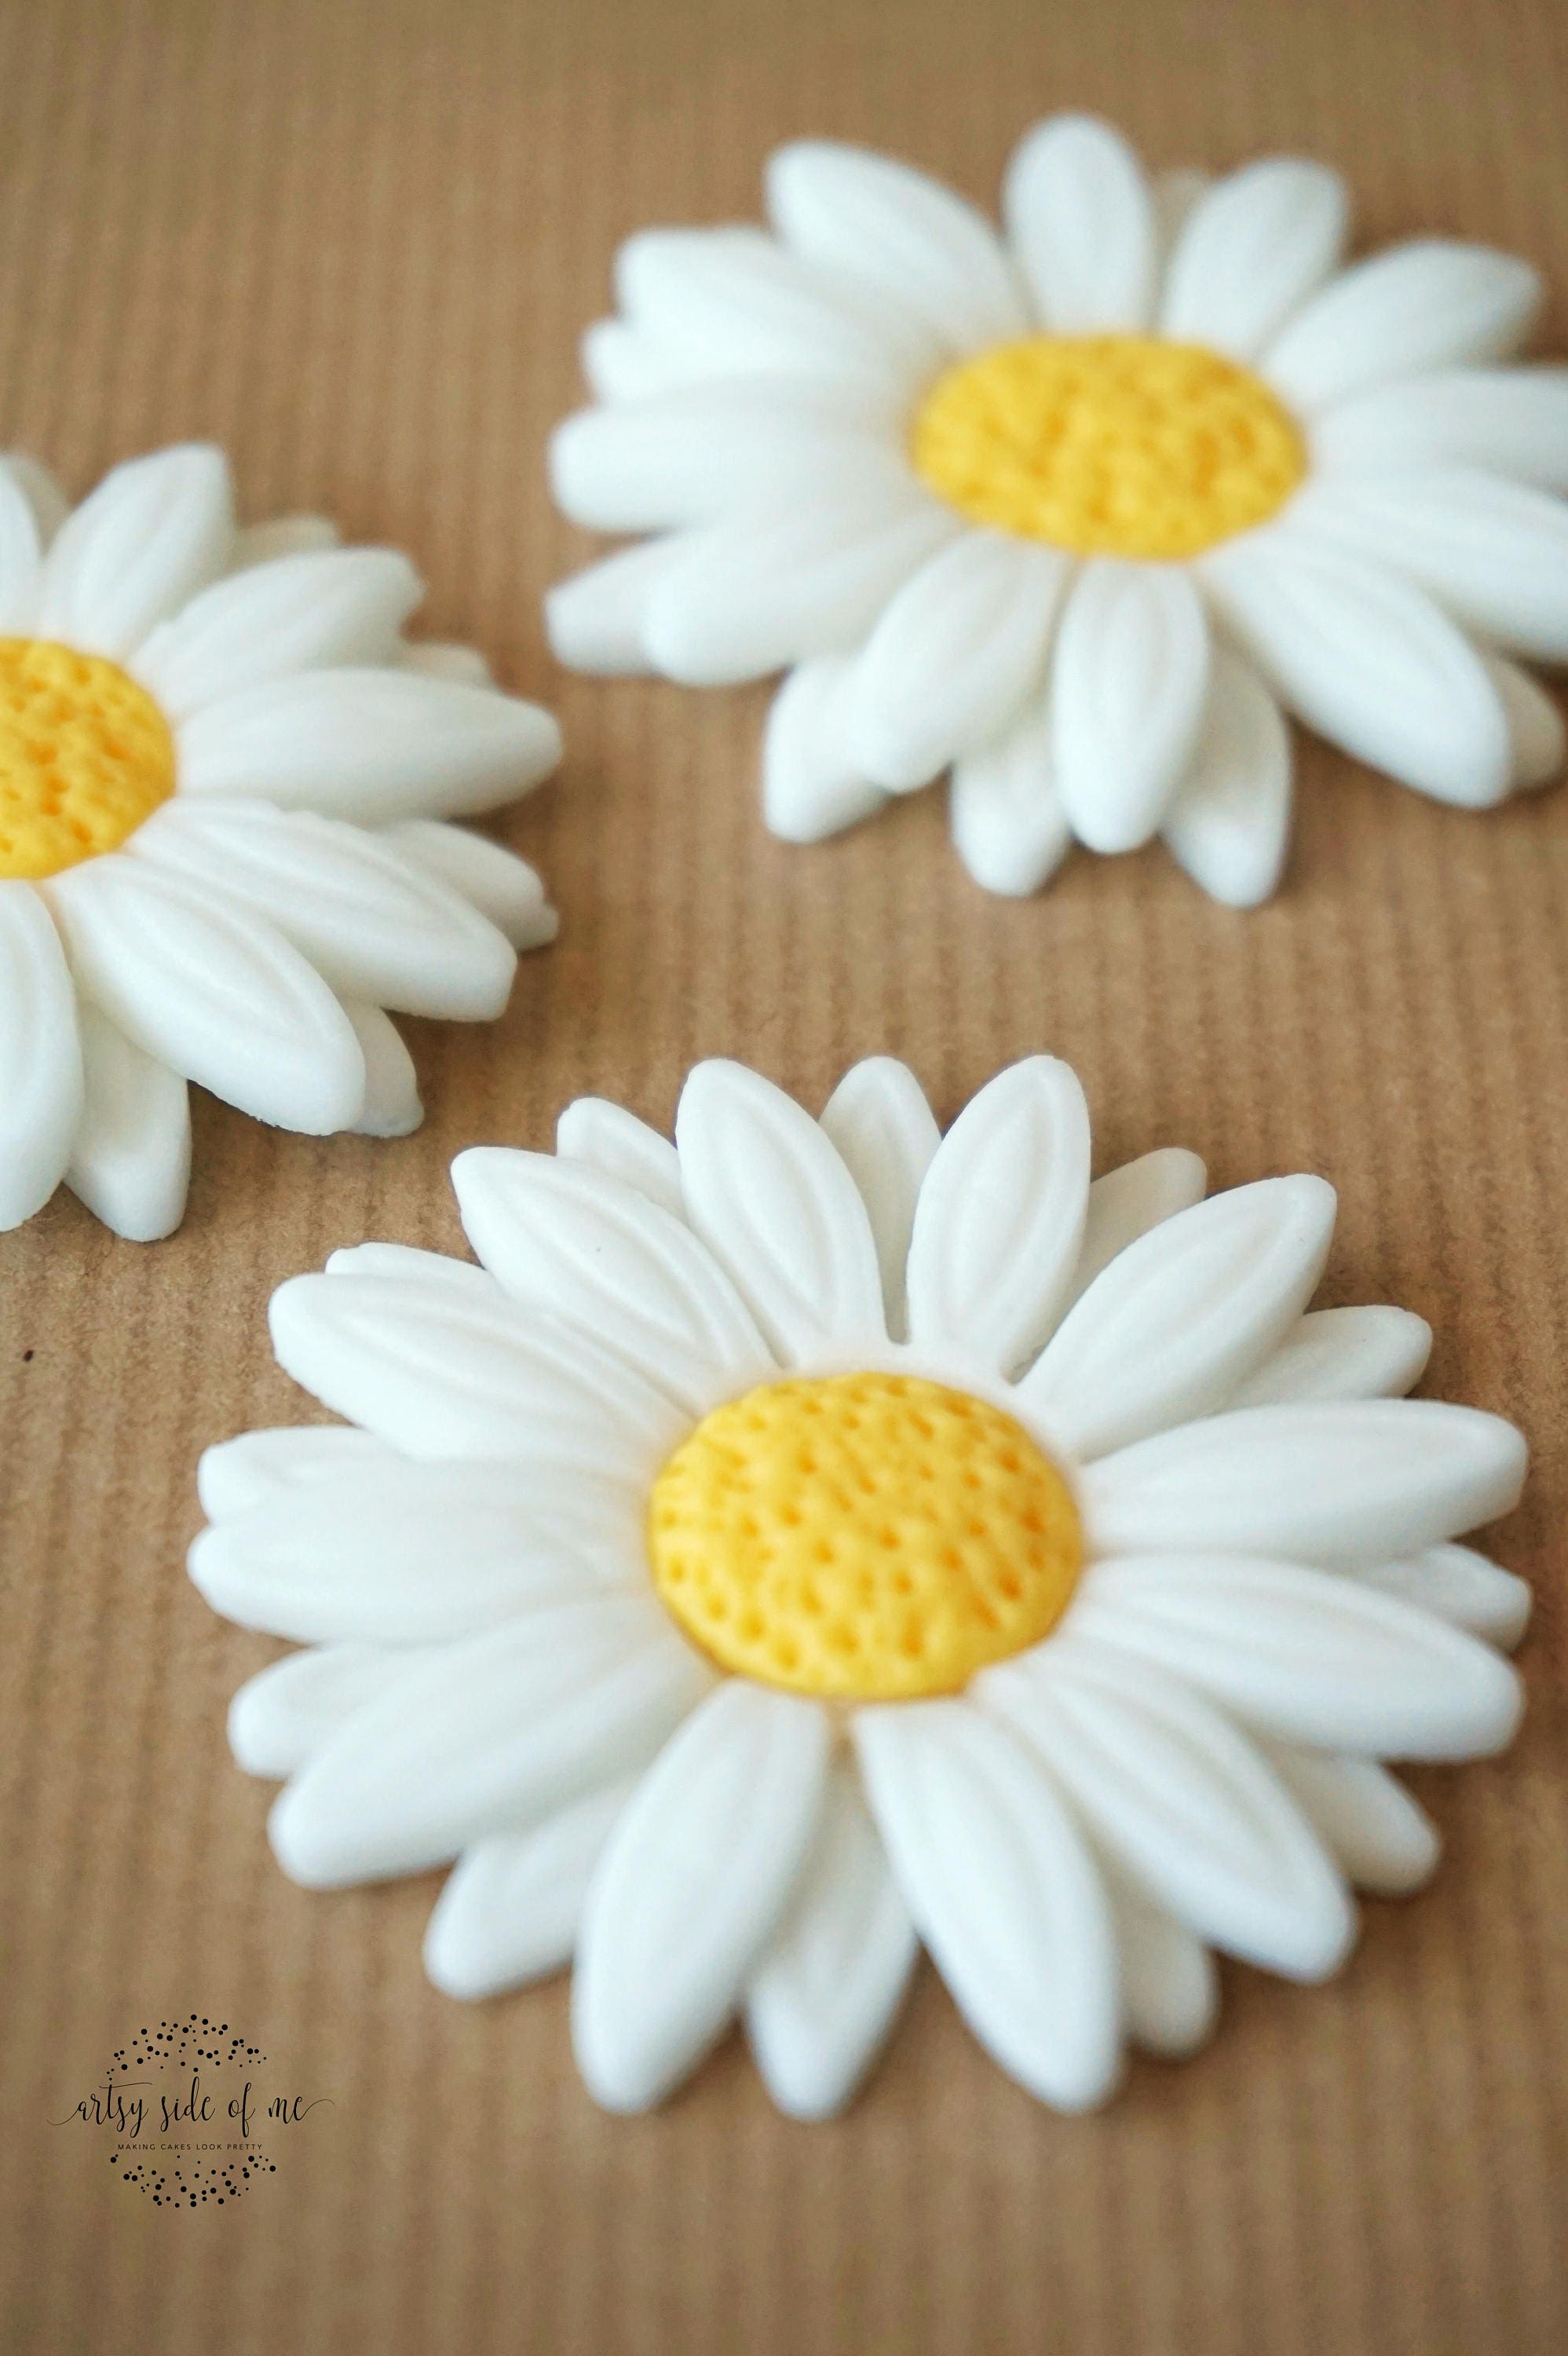 DAISY FLOWER EDIBLE PRINTED ICING CUP CAKE TOPPER DECORATIONS 